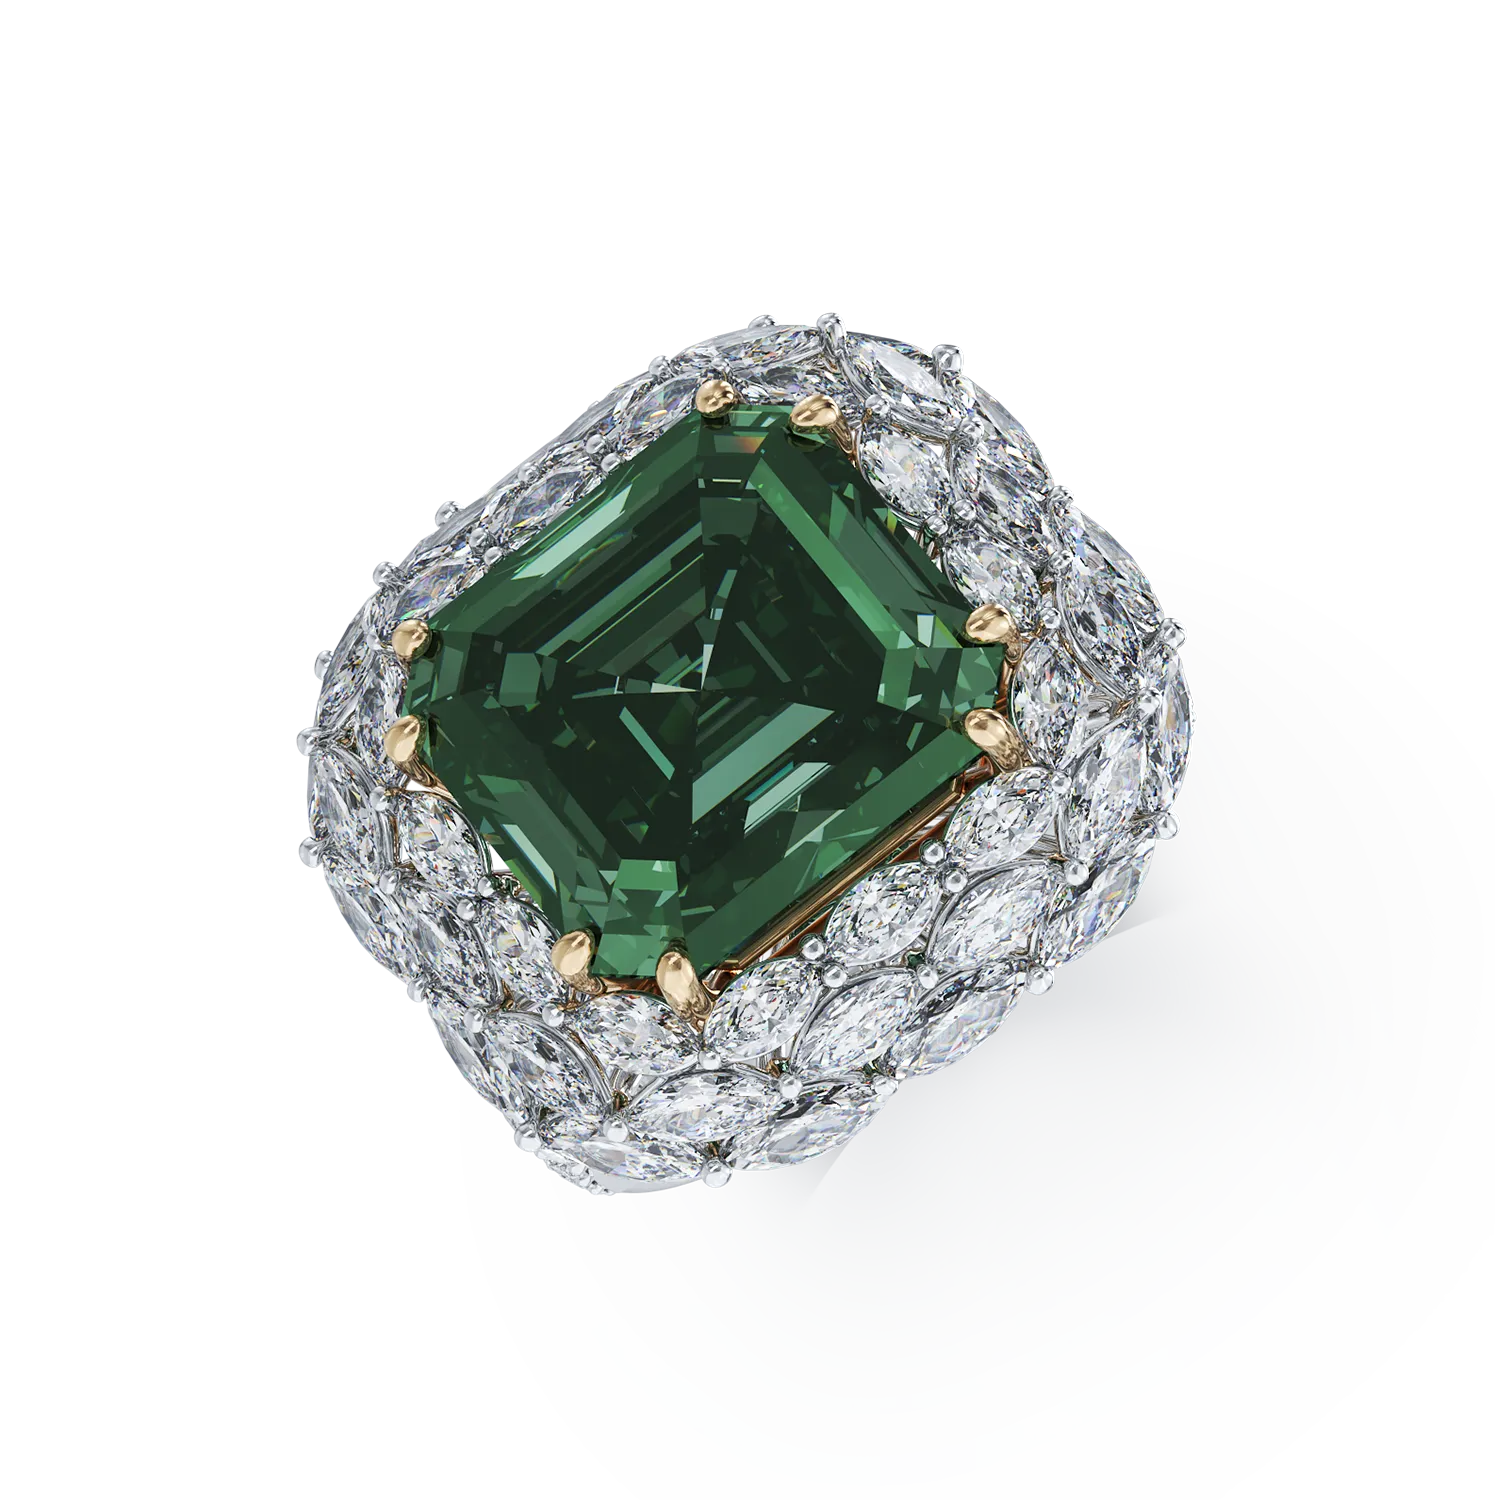 White gold ring with 10.91ct emerald and 3.14ct diamonds